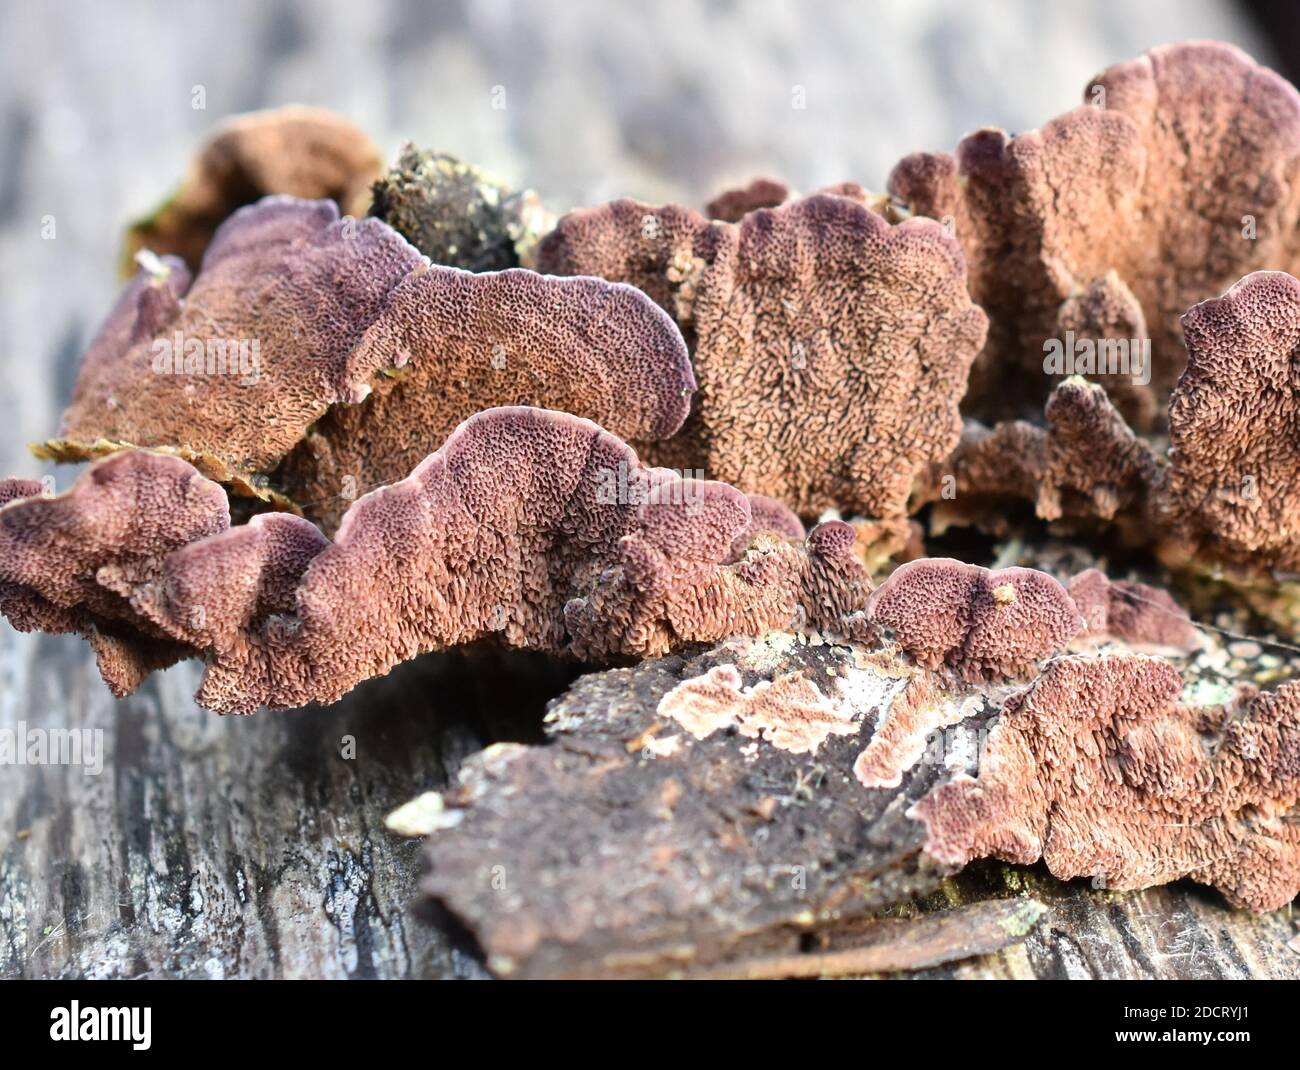 The saprophytic fungus Trichaptum abietinum growing on the bark of a conifer tree showing underside Stock Photo